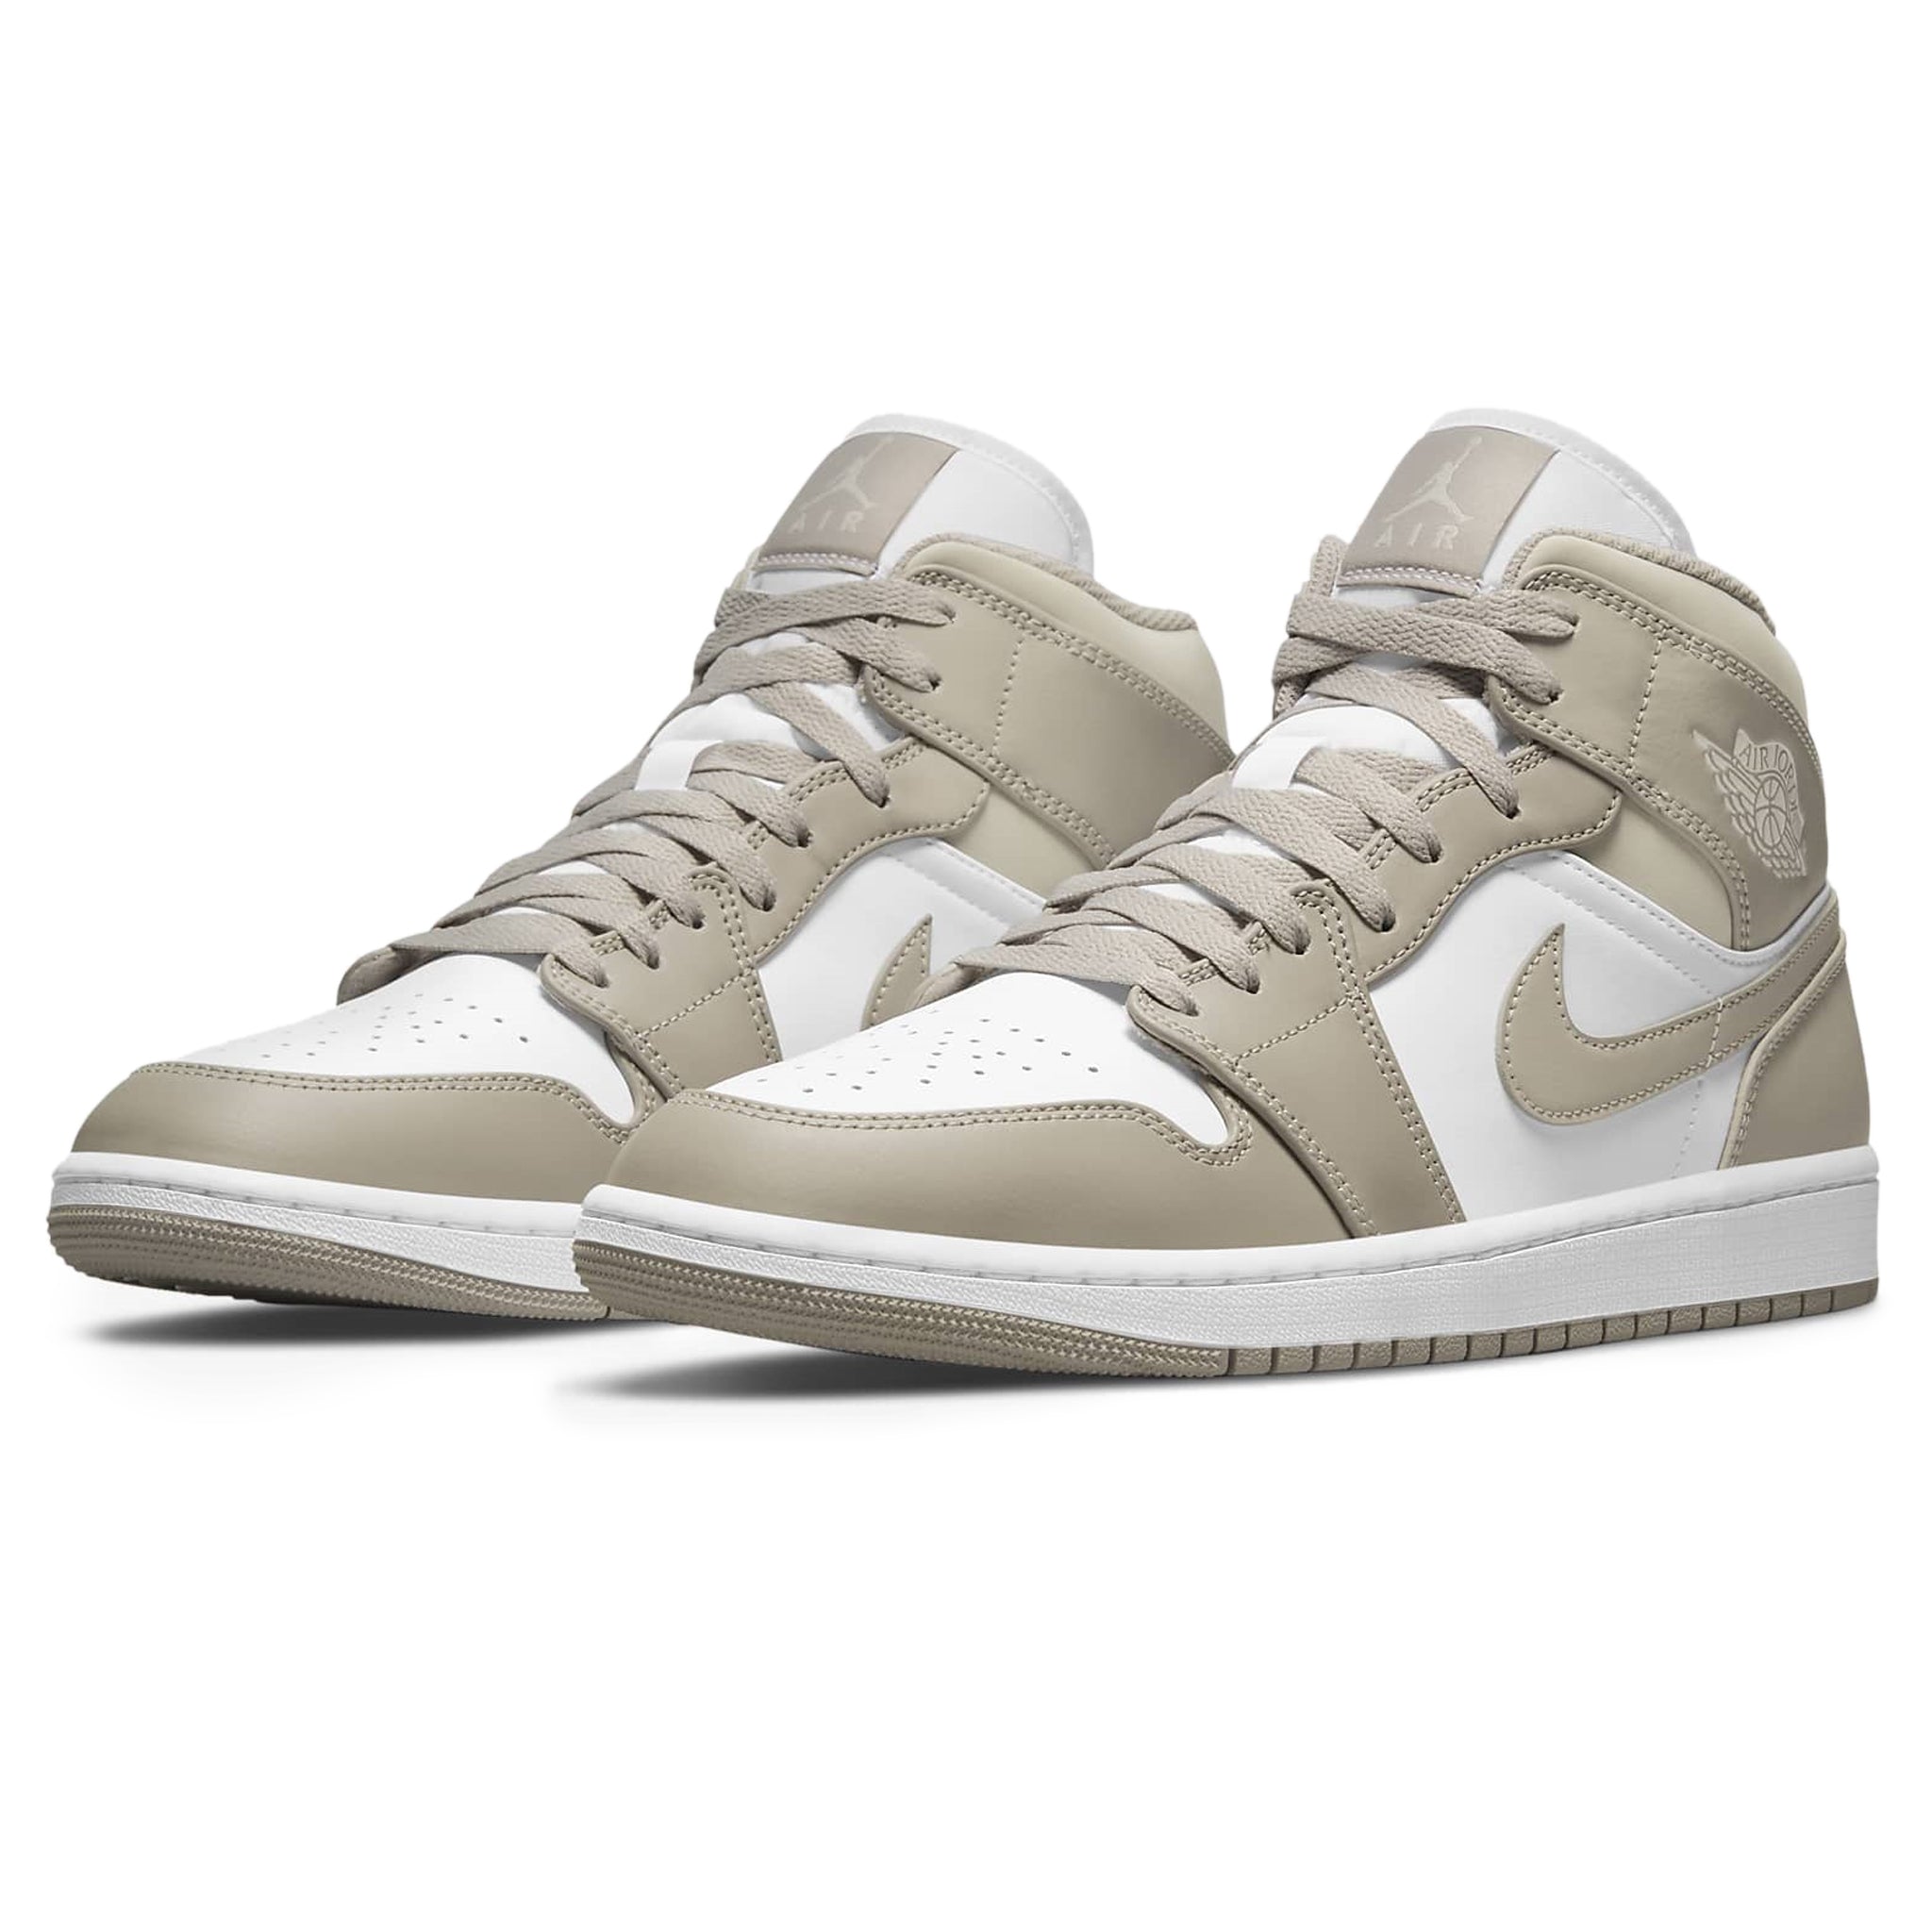 Front side view of Air Jordan 1 Mid Linen 554724-082